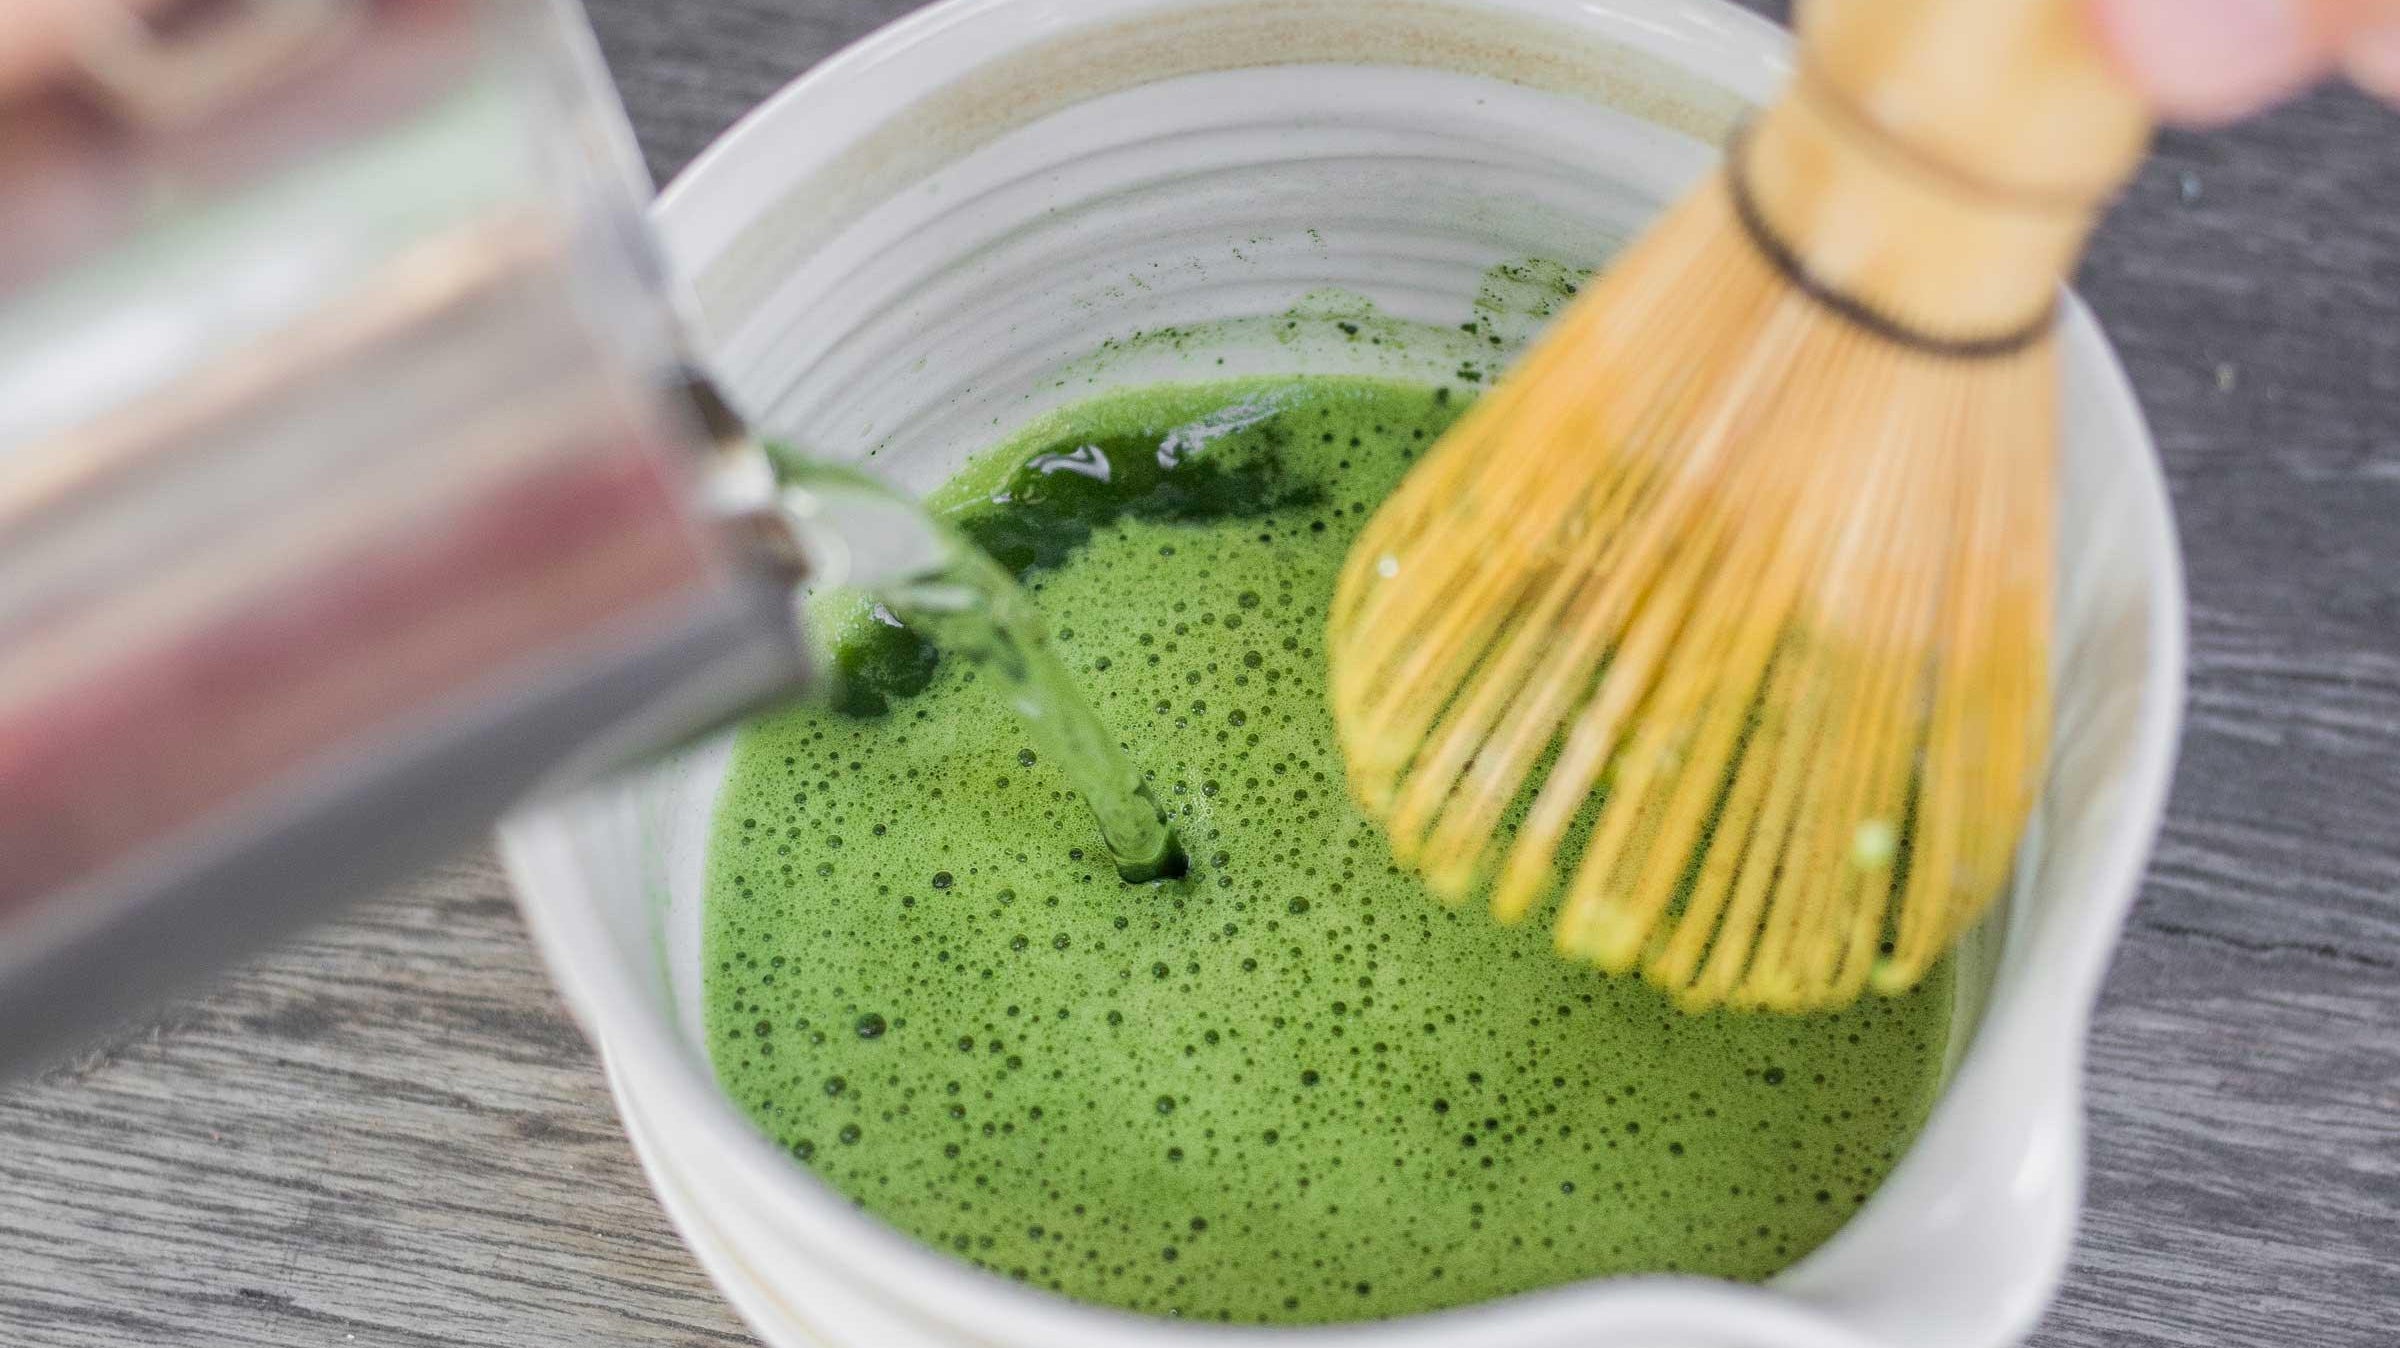 What is Matcha? Rread all you need to know about this wonder tea on the Matcha Cafe Bali blog journal